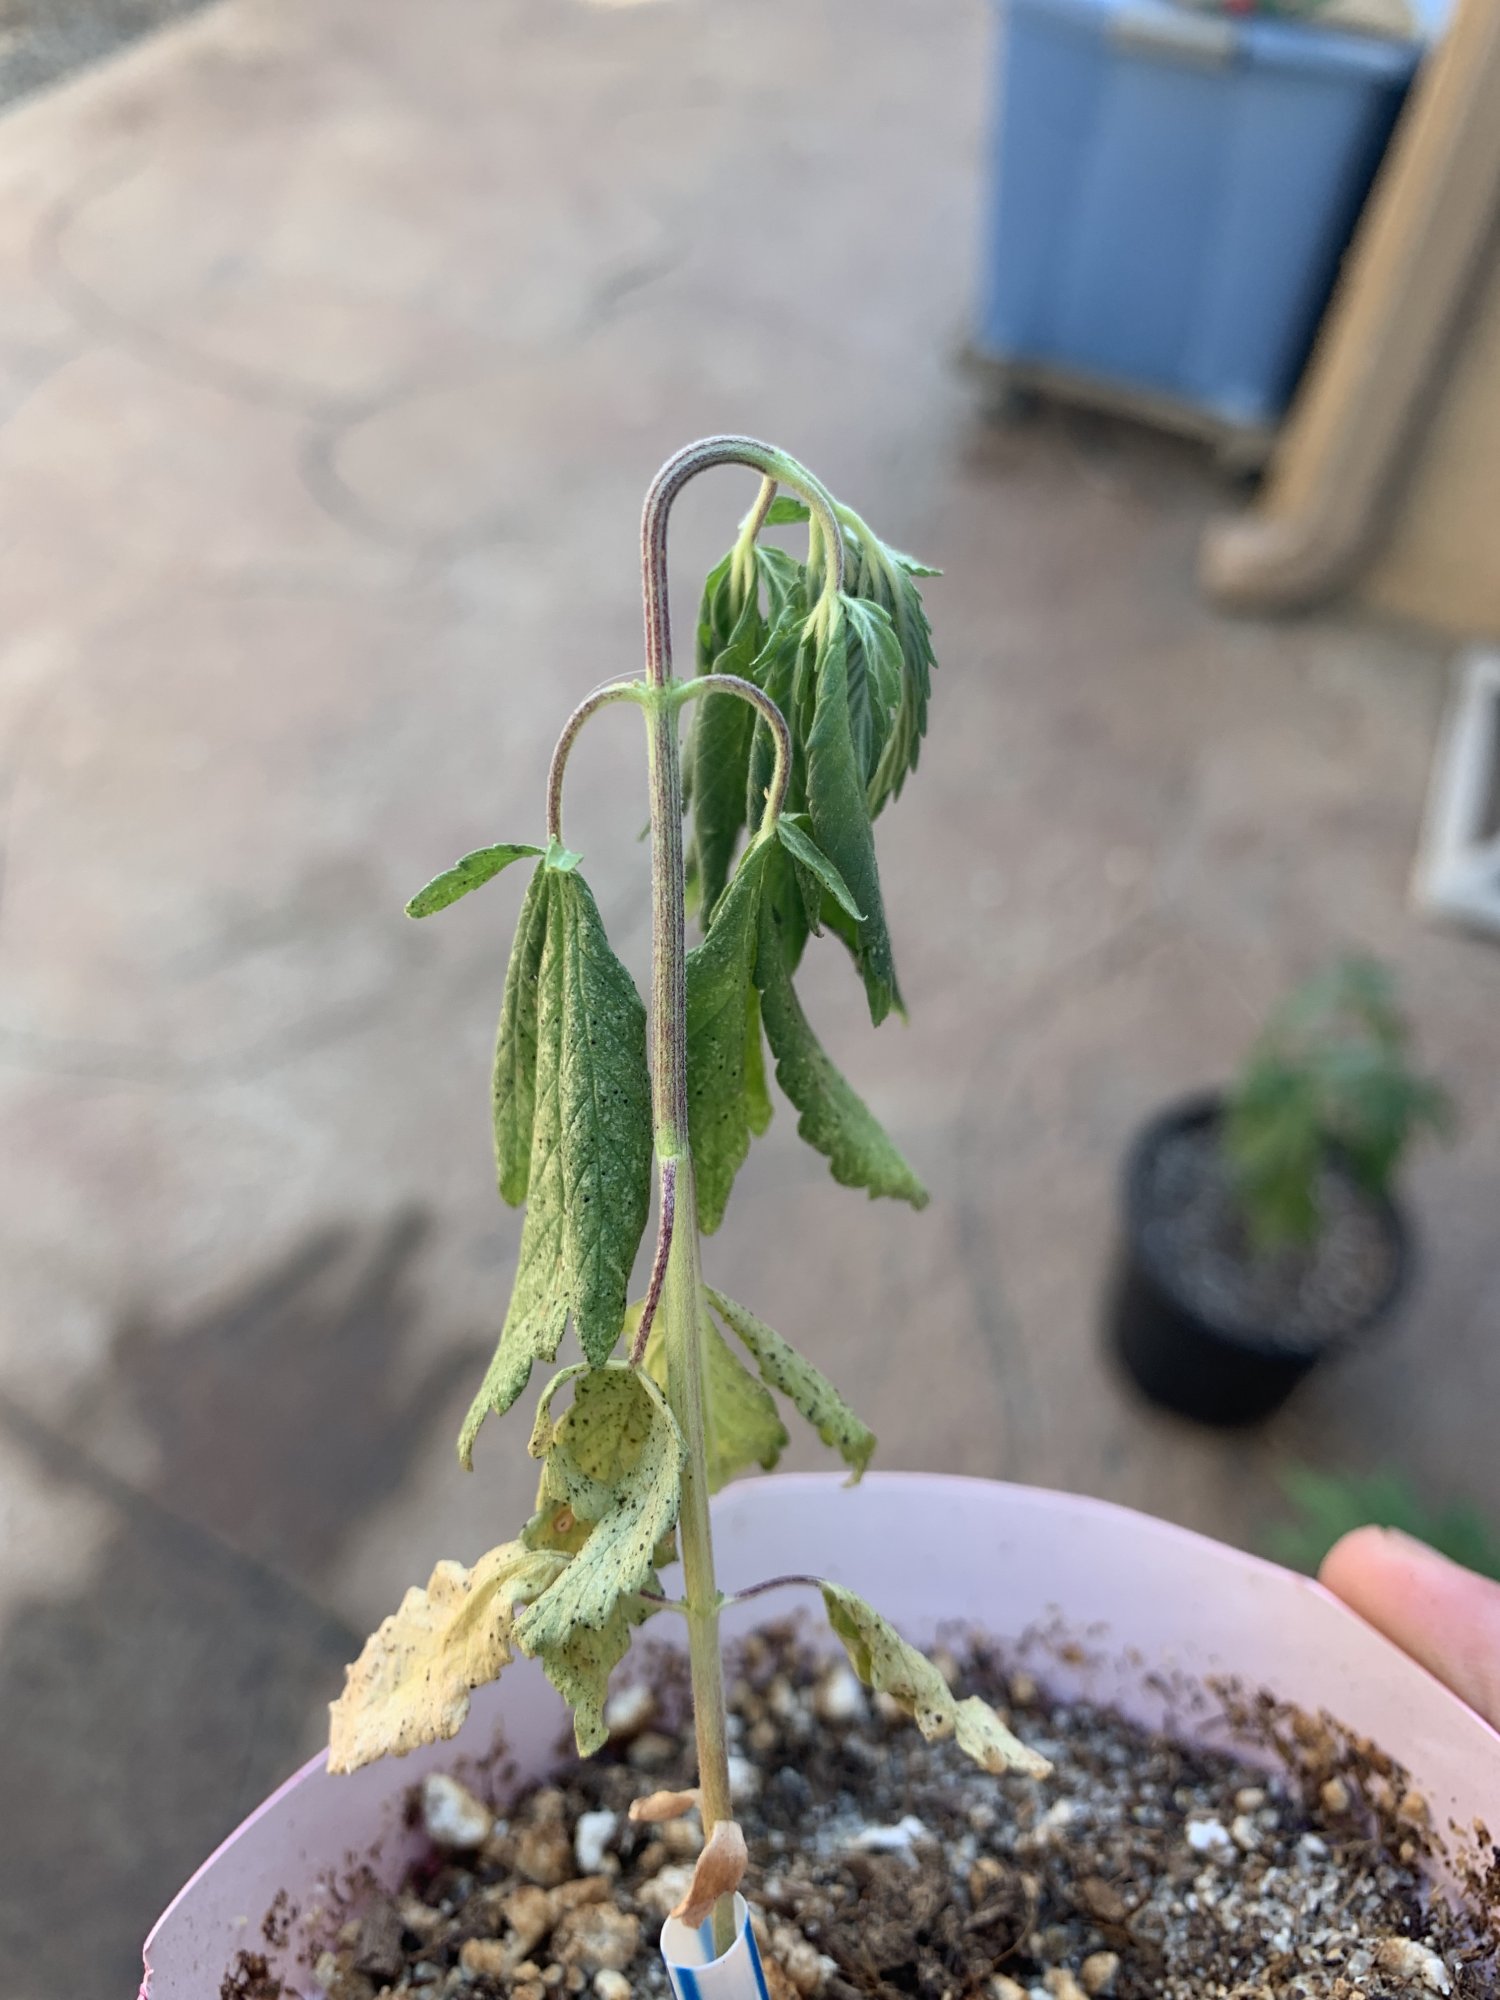 Help please the tops of the plants have fallen over 2